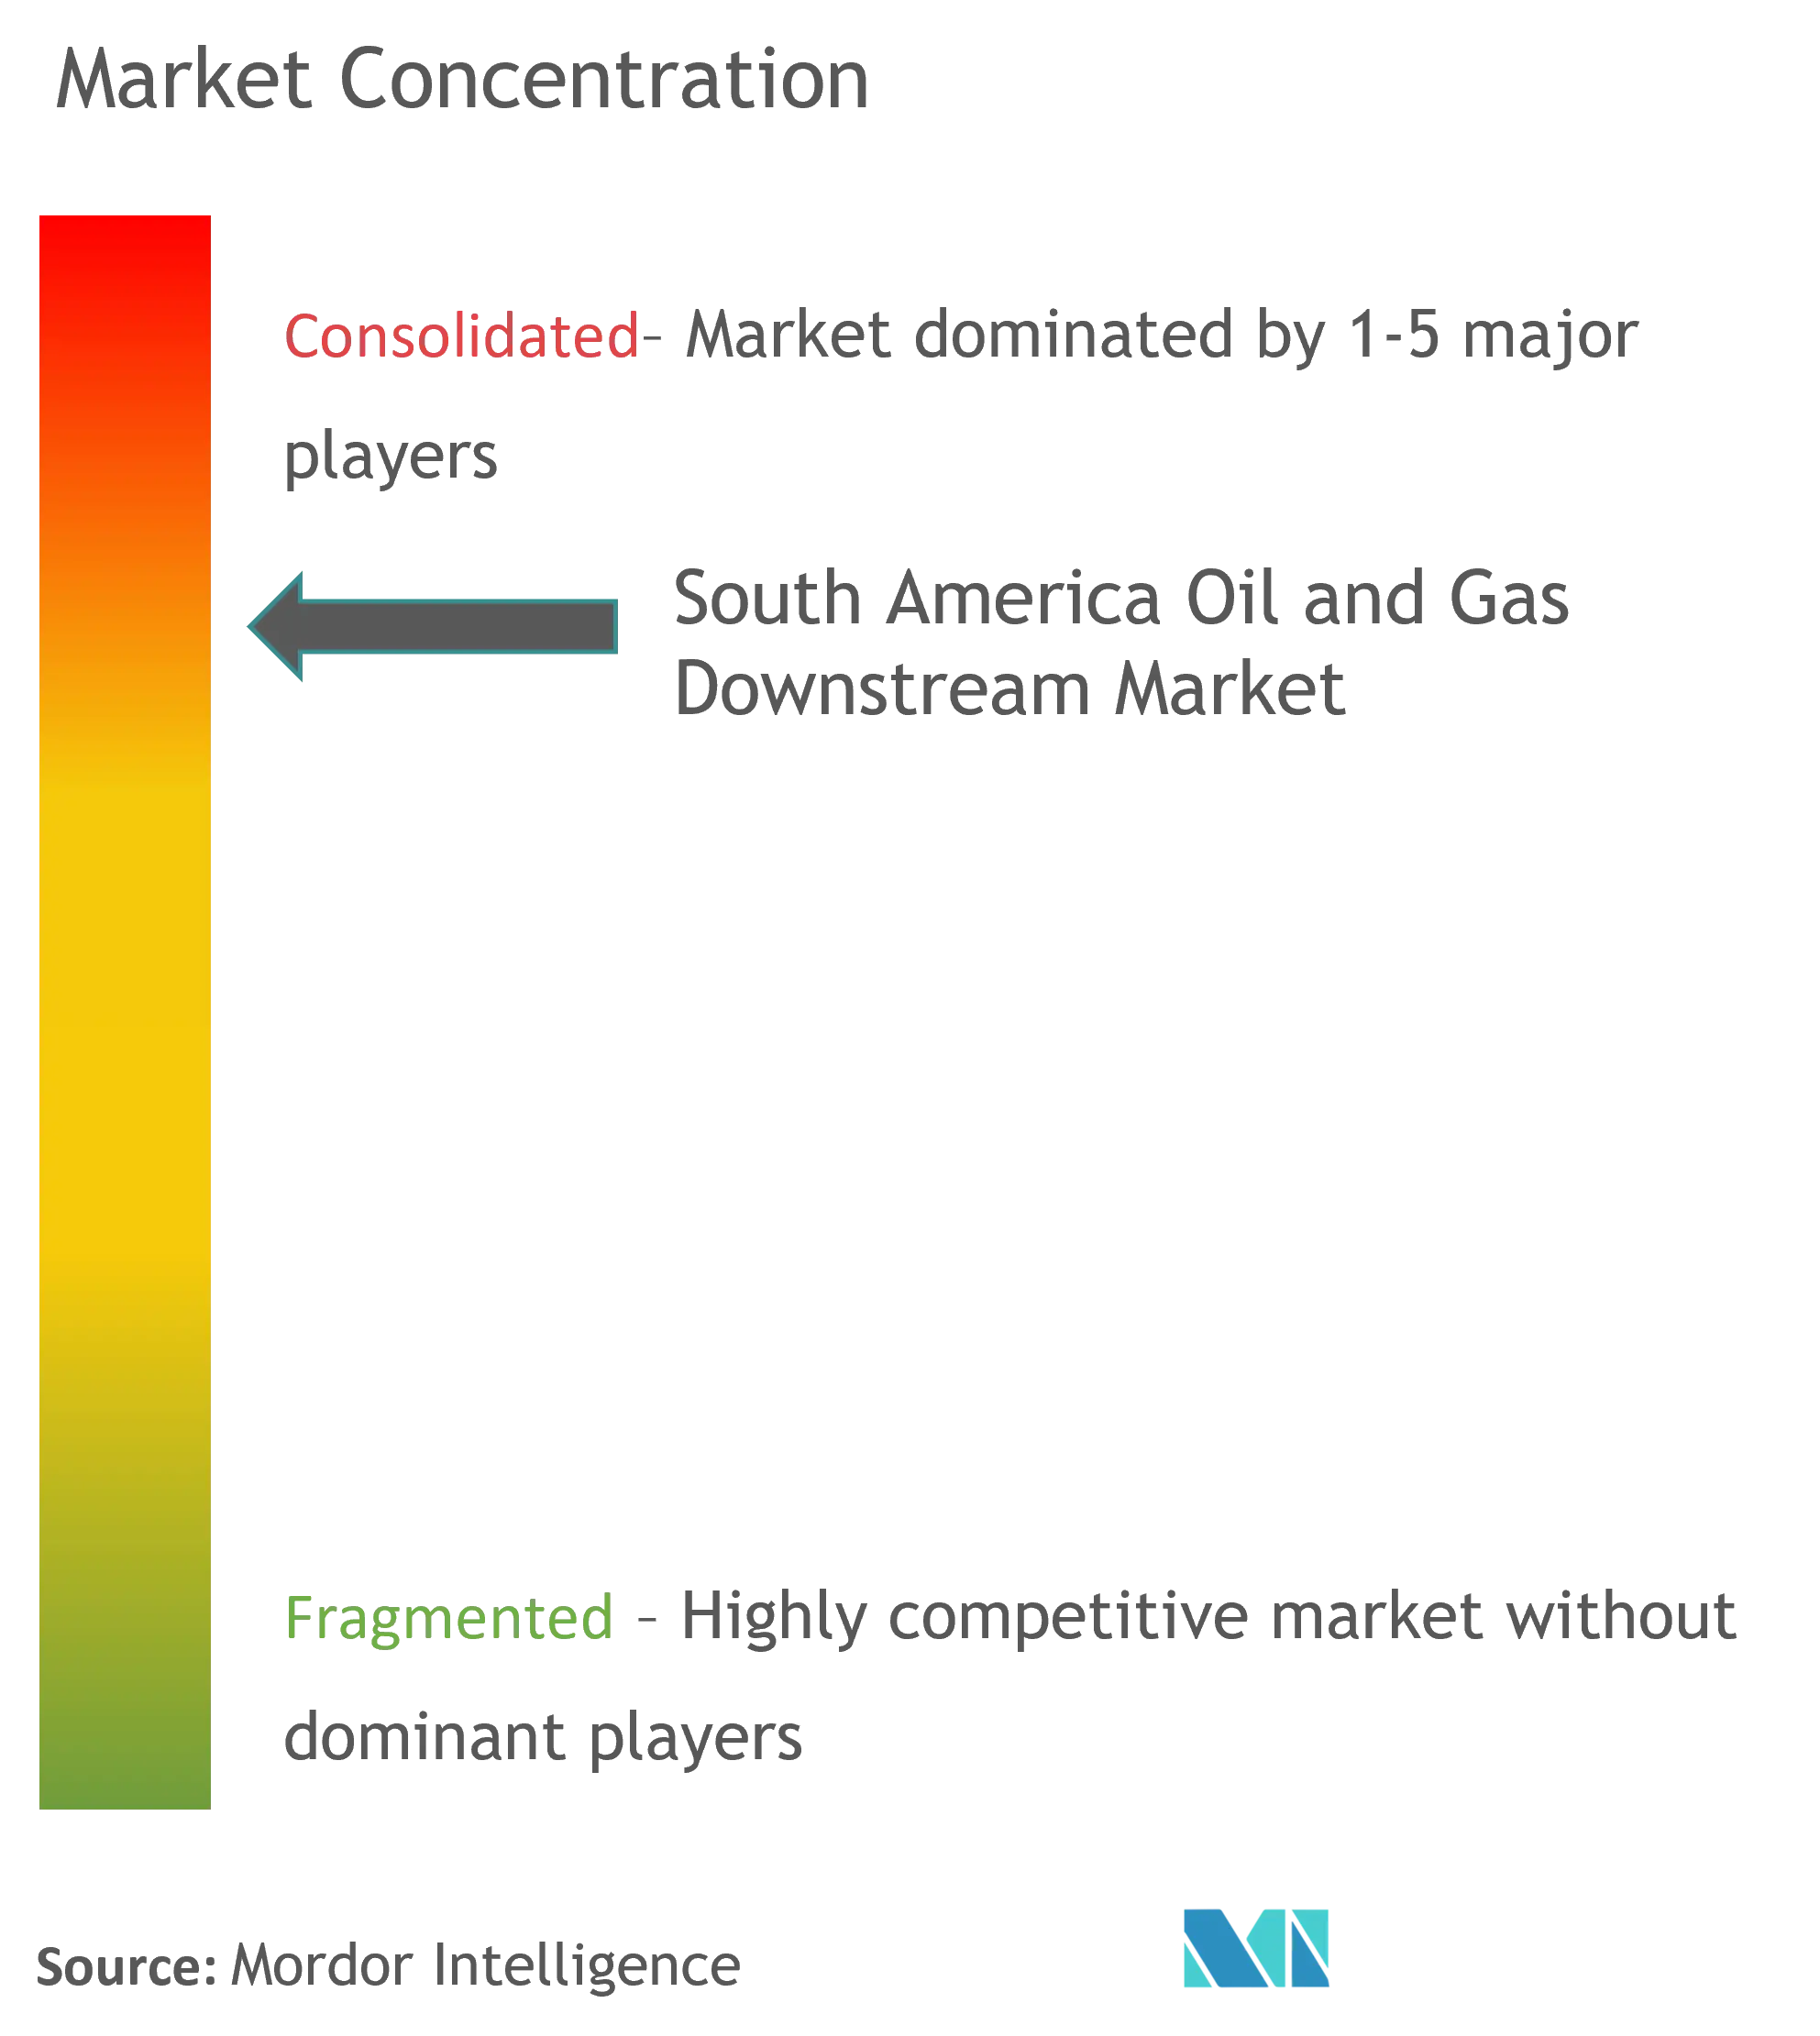 Market Concentration - South America Oil and Gas Downstream Market.png